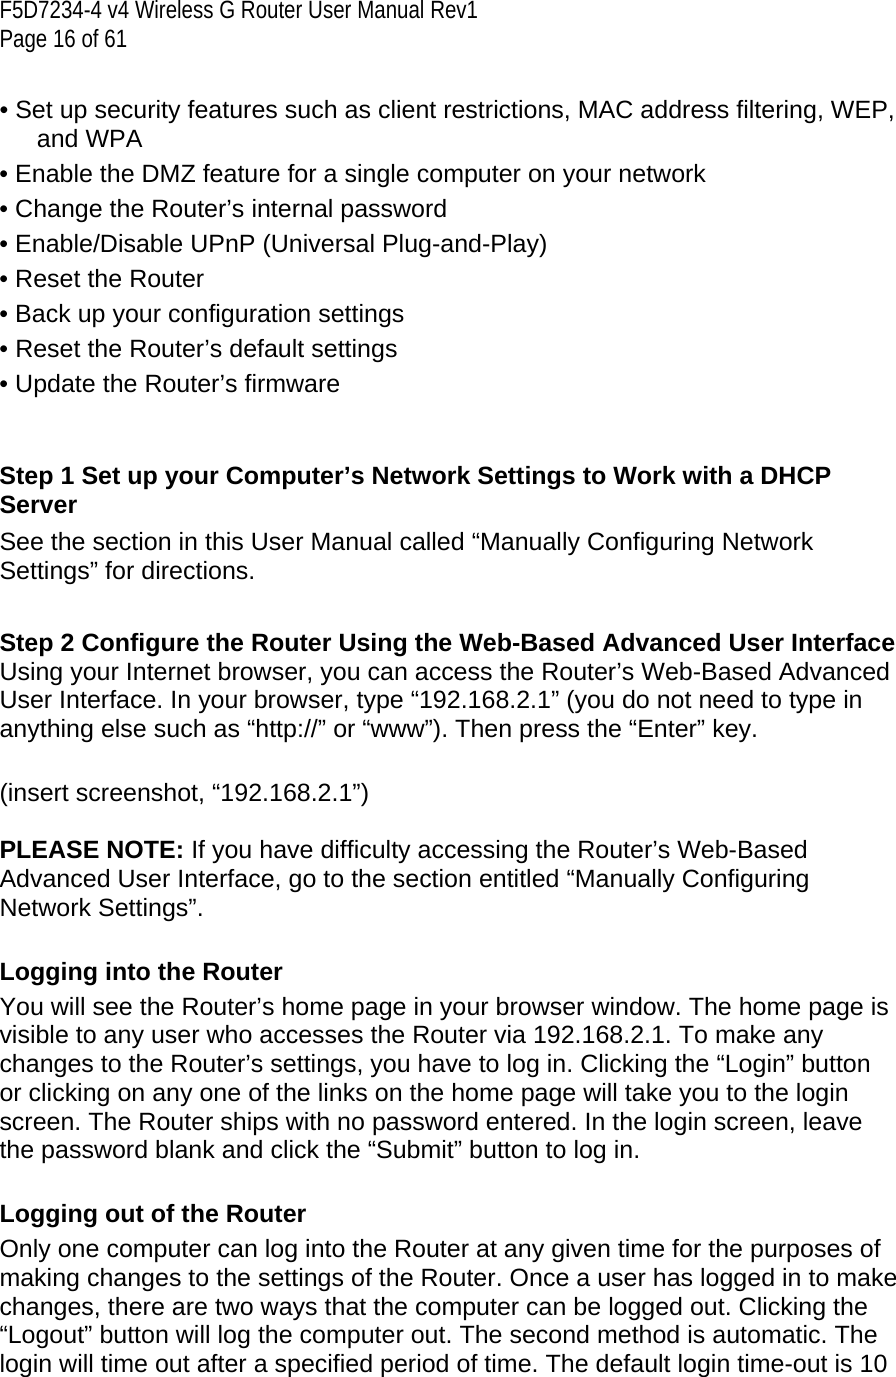 F5D7234-4 v4 Wireless G Router User Manual Rev1  Page 16 of 61   • Set up security features such as client restrictions, MAC address filtering, WEP, and WPA • Enable the DMZ feature for a single computer on your network • Change the Router’s internal password • Enable/Disable UPnP (Universal Plug-and-Play) • Reset the Router • Back up your configuration settings • Reset the Router’s default settings • Update the Router’s firmware   Step 1 Set up your Computer’s Network Settings to Work with a DHCP Server See the section in this User Manual called “Manually Configuring Network Settings” for directions.  Step 2 Configure the Router Using the Web-Based Advanced User Interface  Using your Internet browser, you can access the Router’s Web-Based Advanced User Interface. In your browser, type “192.168.2.1” (you do not need to type in anything else such as “http://” or “www”). Then press the “Enter” key.   (insert screenshot, “192.168.2.1”)  PLEASE NOTE: If you have difficulty accessing the Router’s Web-Based Advanced User Interface, go to the section entitled “Manually Configuring Network Settings”.  Logging into the Router You will see the Router’s home page in your browser window. The home page is visible to any user who accesses the Router via 192.168.2.1. To make any changes to the Router’s settings, you have to log in. Clicking the “Login” button or clicking on any one of the links on the home page will take you to the login screen. The Router ships with no password entered. In the login screen, leave the password blank and click the “Submit” button to log in.   Logging out of the Router Only one computer can log into the Router at any given time for the purposes of making changes to the settings of the Router. Once a user has logged in to make changes, there are two ways that the computer can be logged out. Clicking the “Logout” button will log the computer out. The second method is automatic. The login will time out after a specified period of time. The default login time-out is 10 